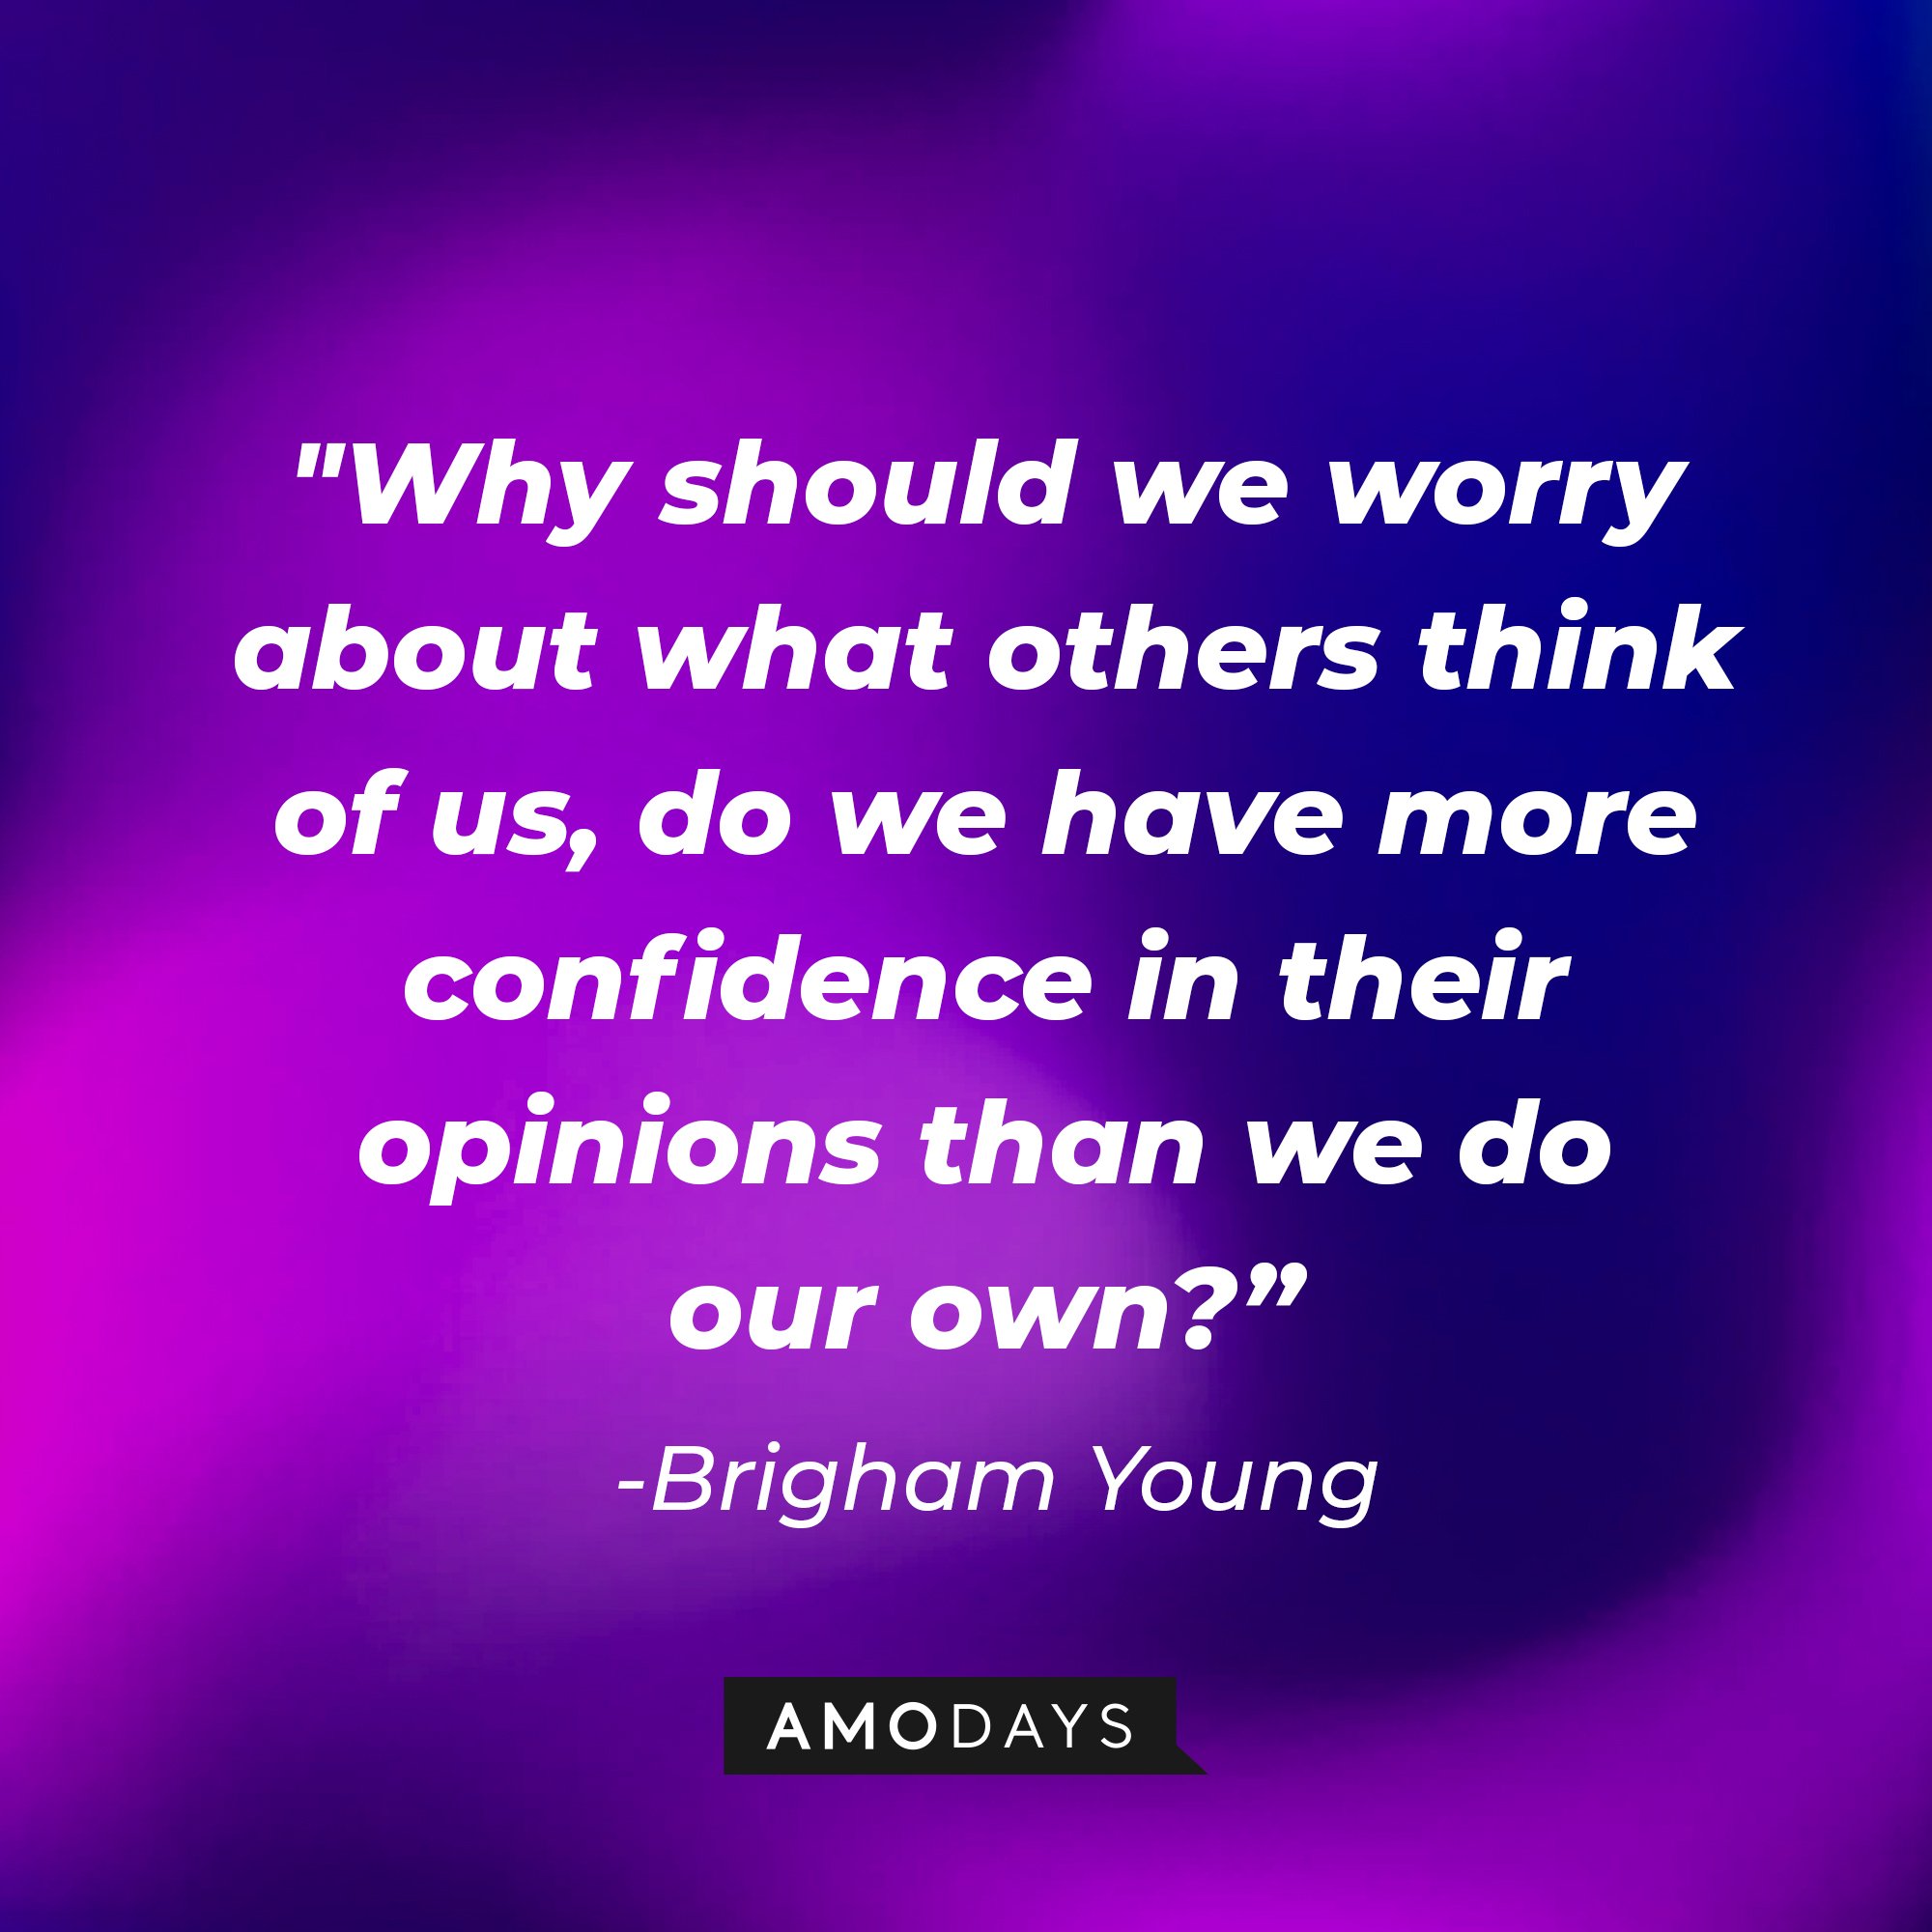 Brigham Young's quote: "Why should we worry about what others think of us, do we have more confidence in their opinions than we do our own?" | Image: AmoDays 